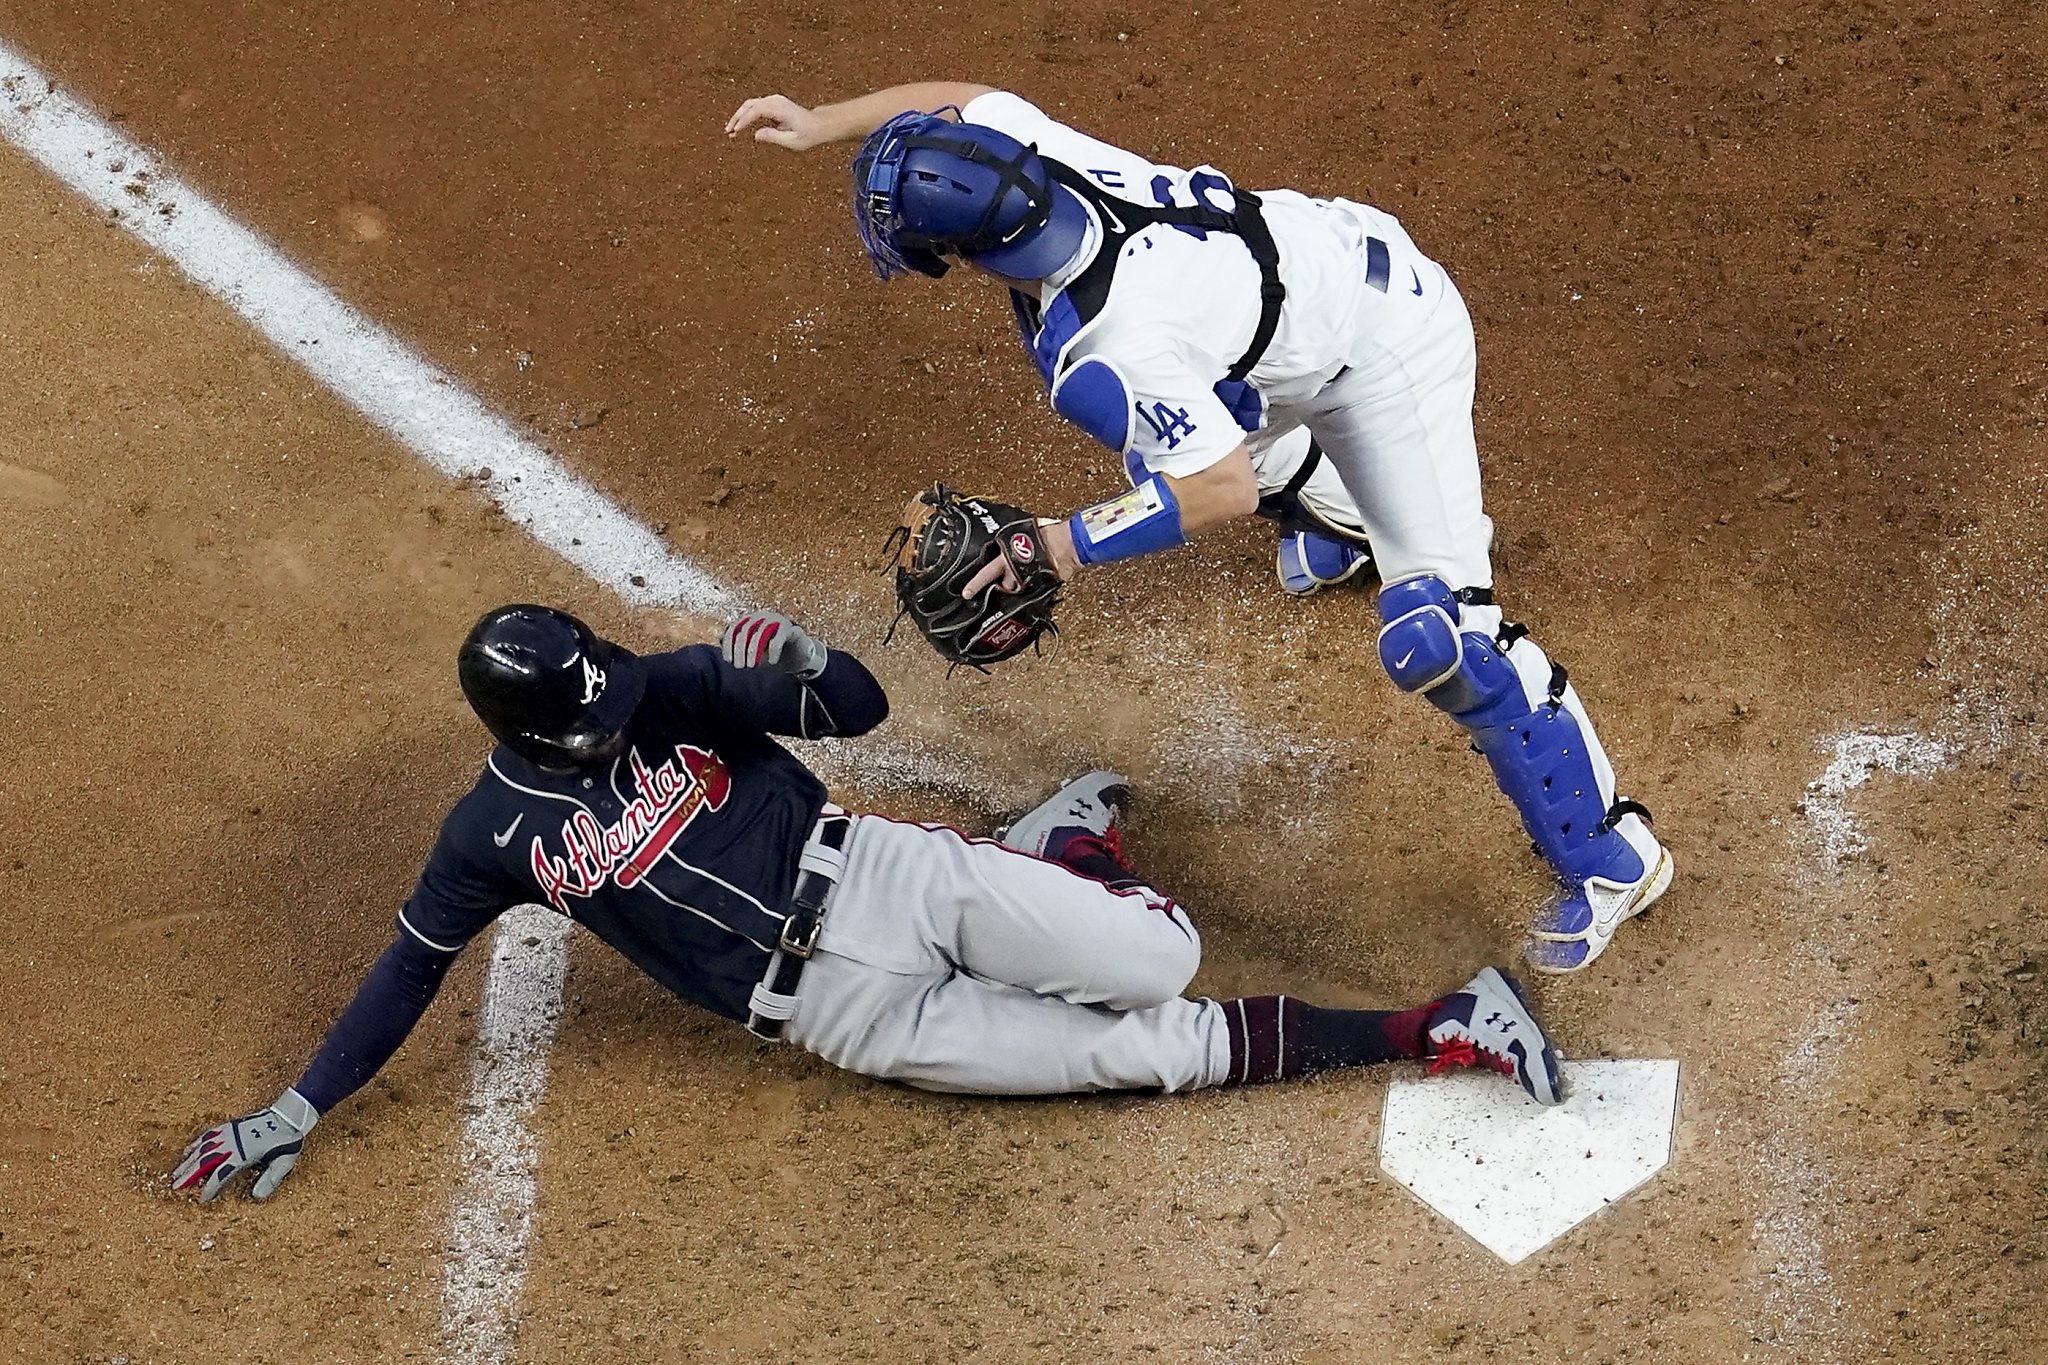 Braves' trip to NLCS extra special for Freddie Freeman